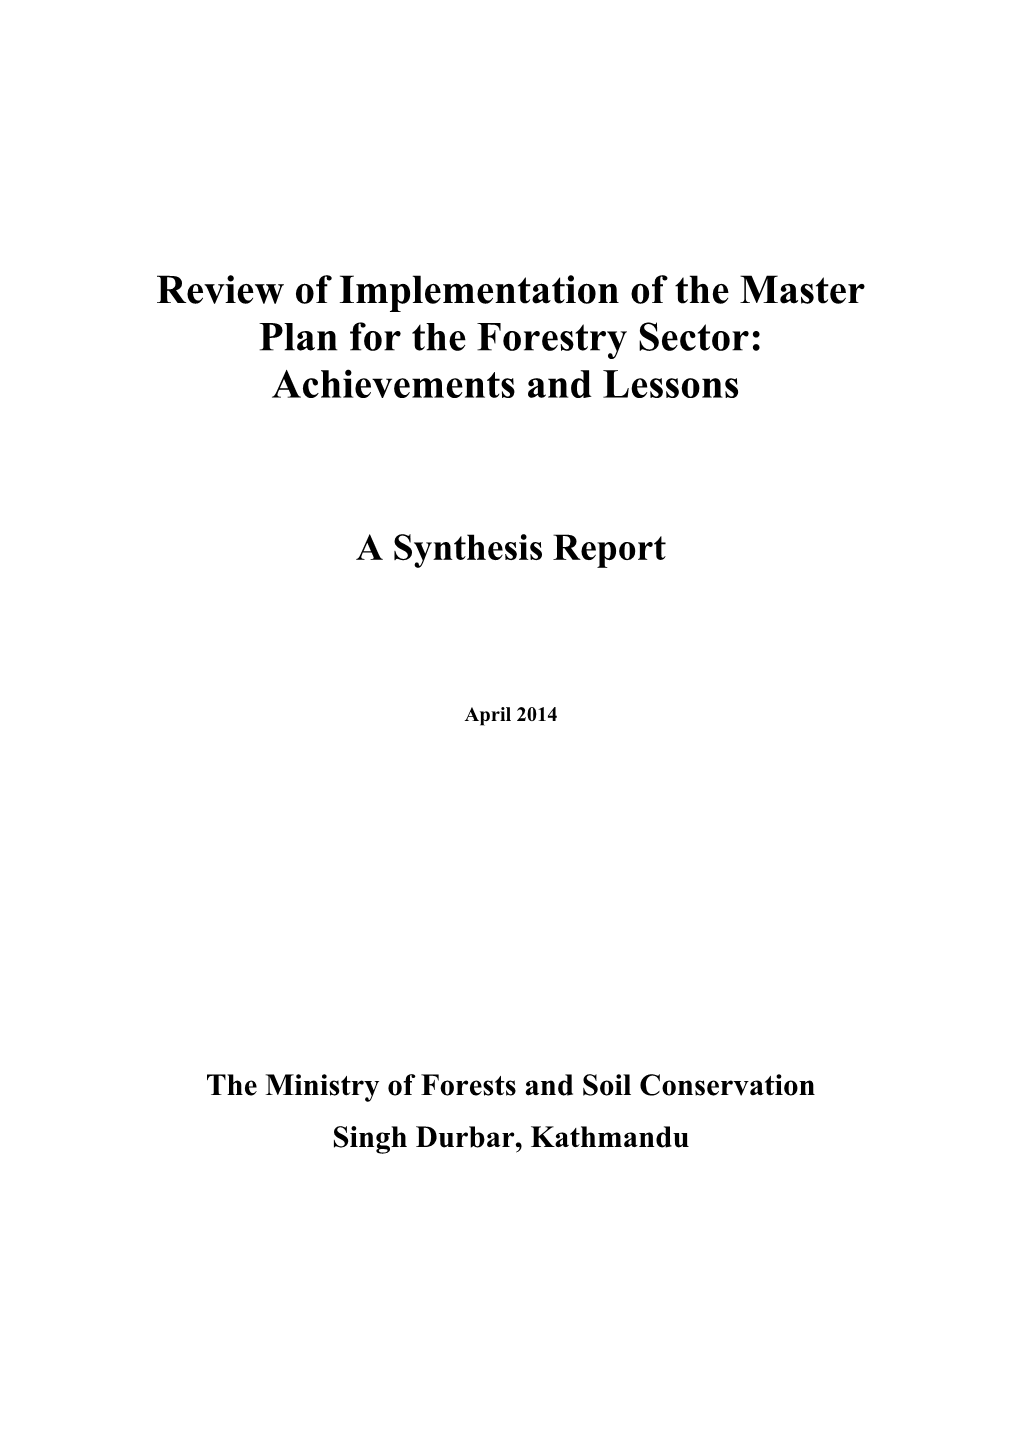 Review of Implementation of the Master Plan for the Forestry Sector: Achievements and Lessons